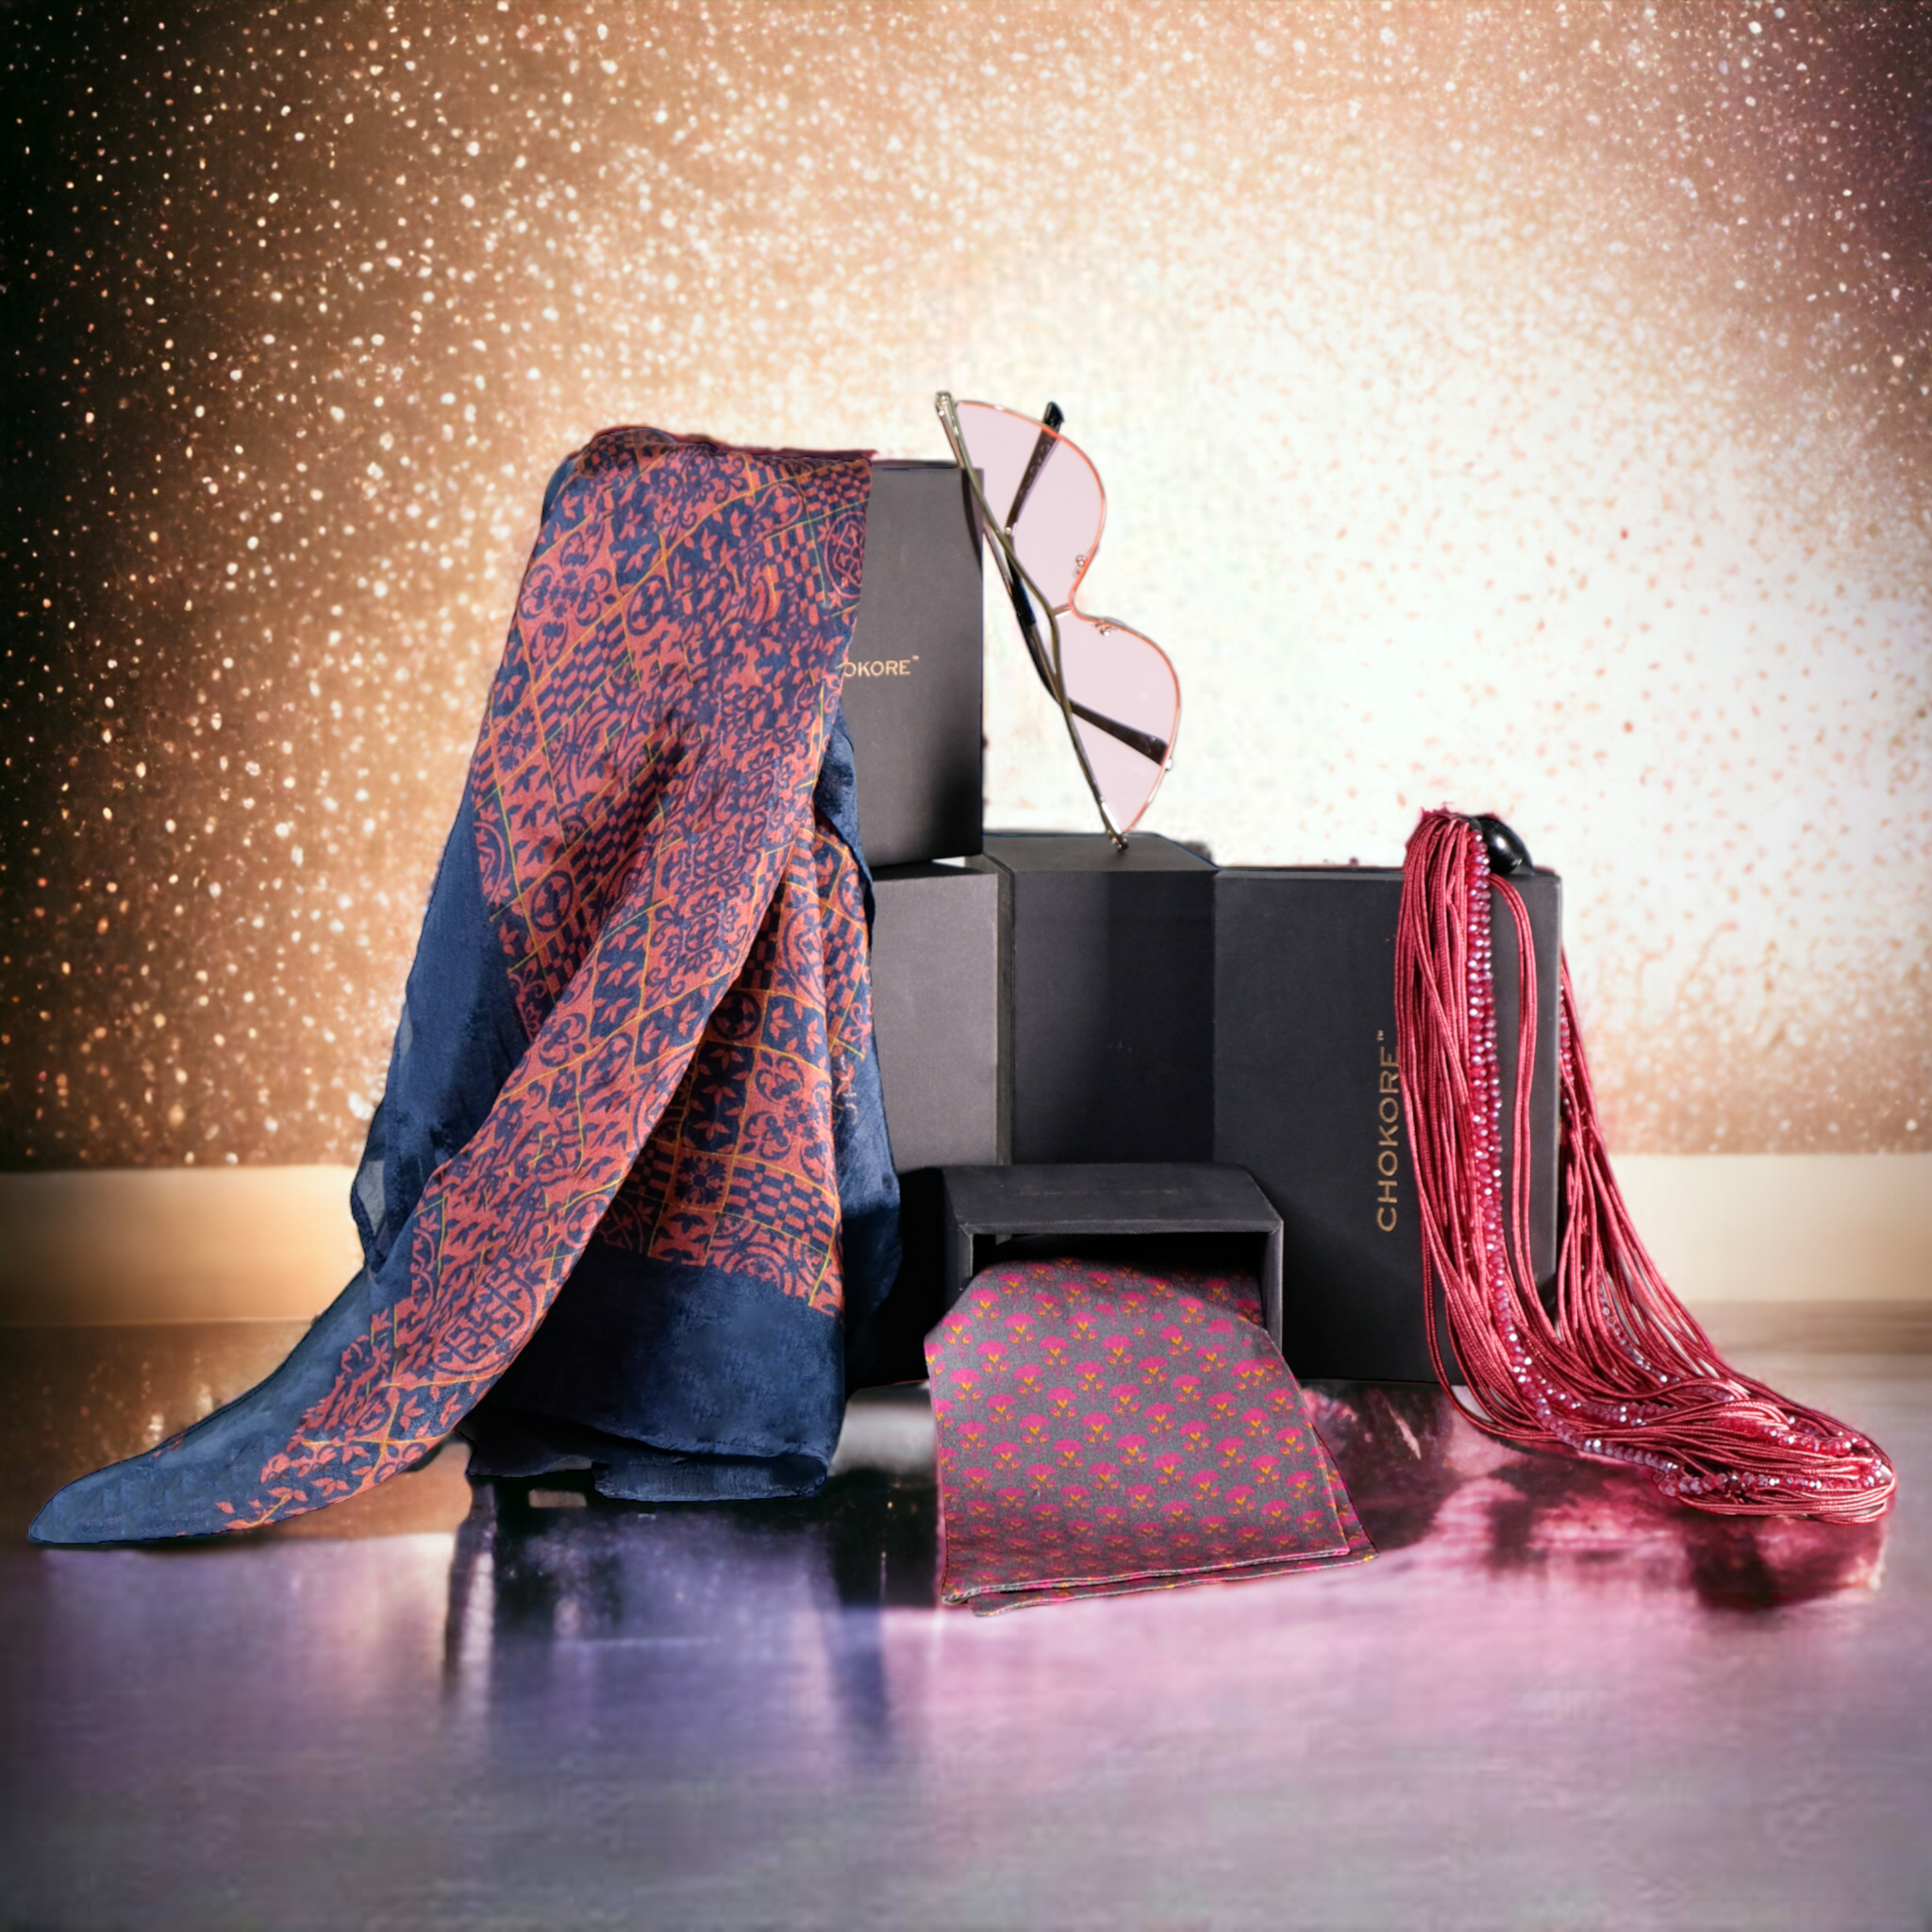 Chokore Special 4-in-1 Gift Set for Her (Silk Stole, Scarf, Sunglasses, & Necklace)